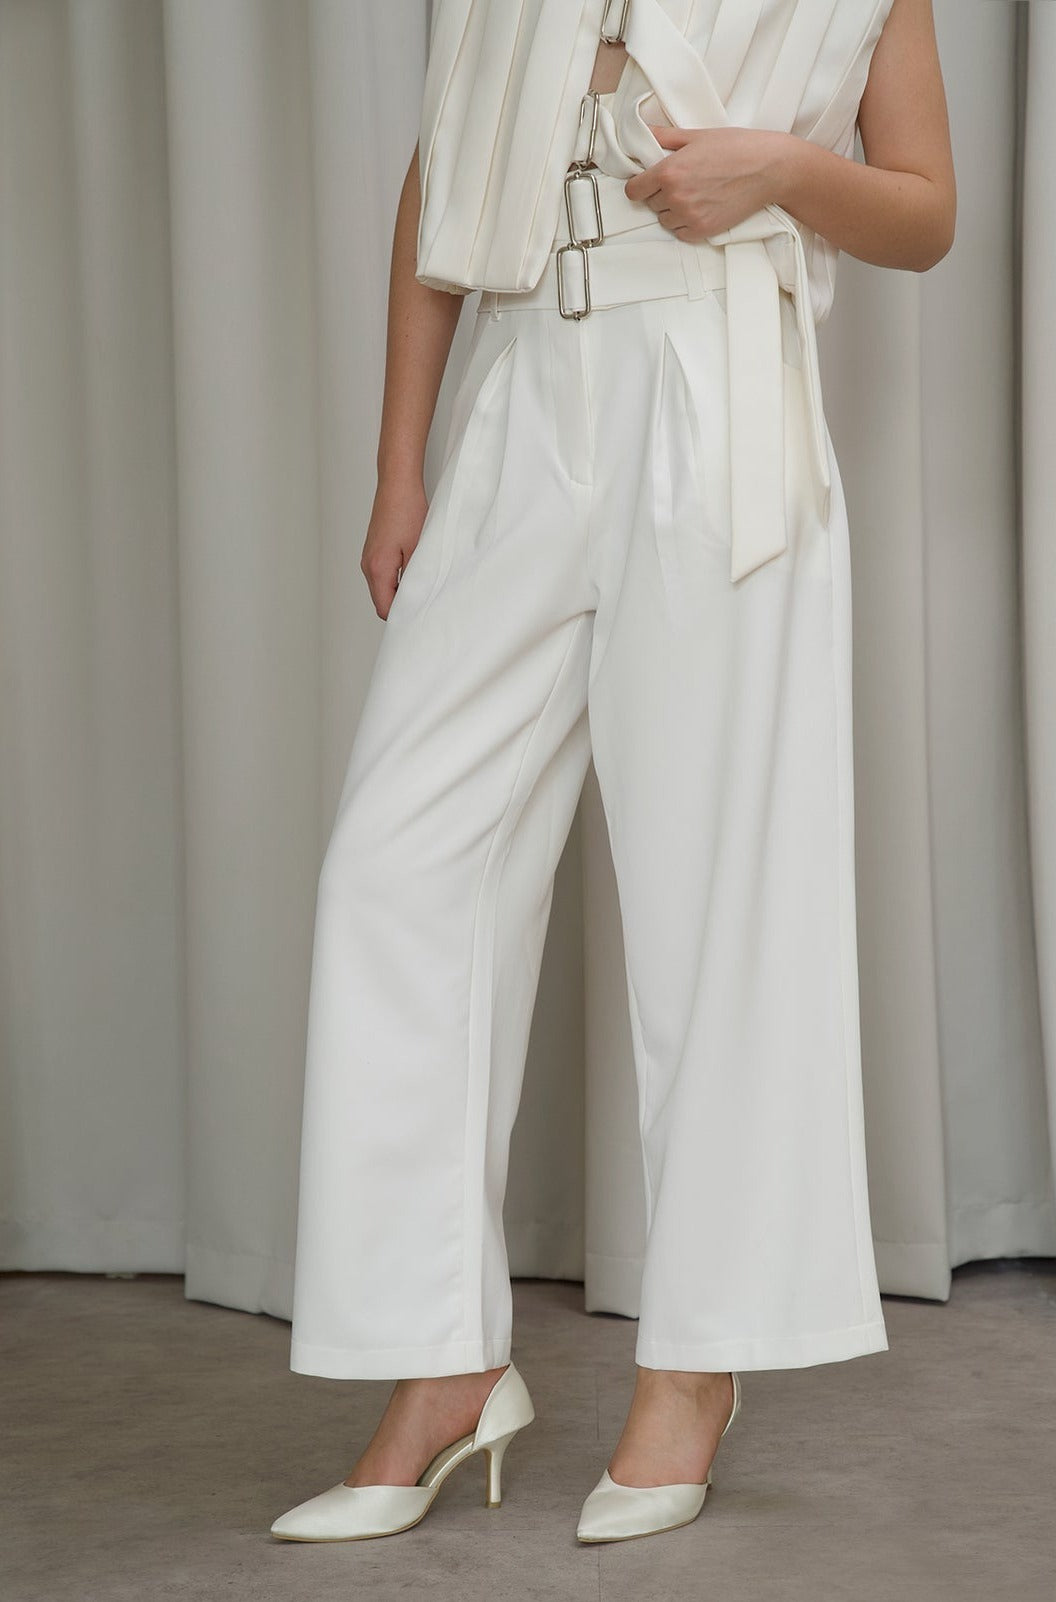 Tempo Pants In White (2 Left)